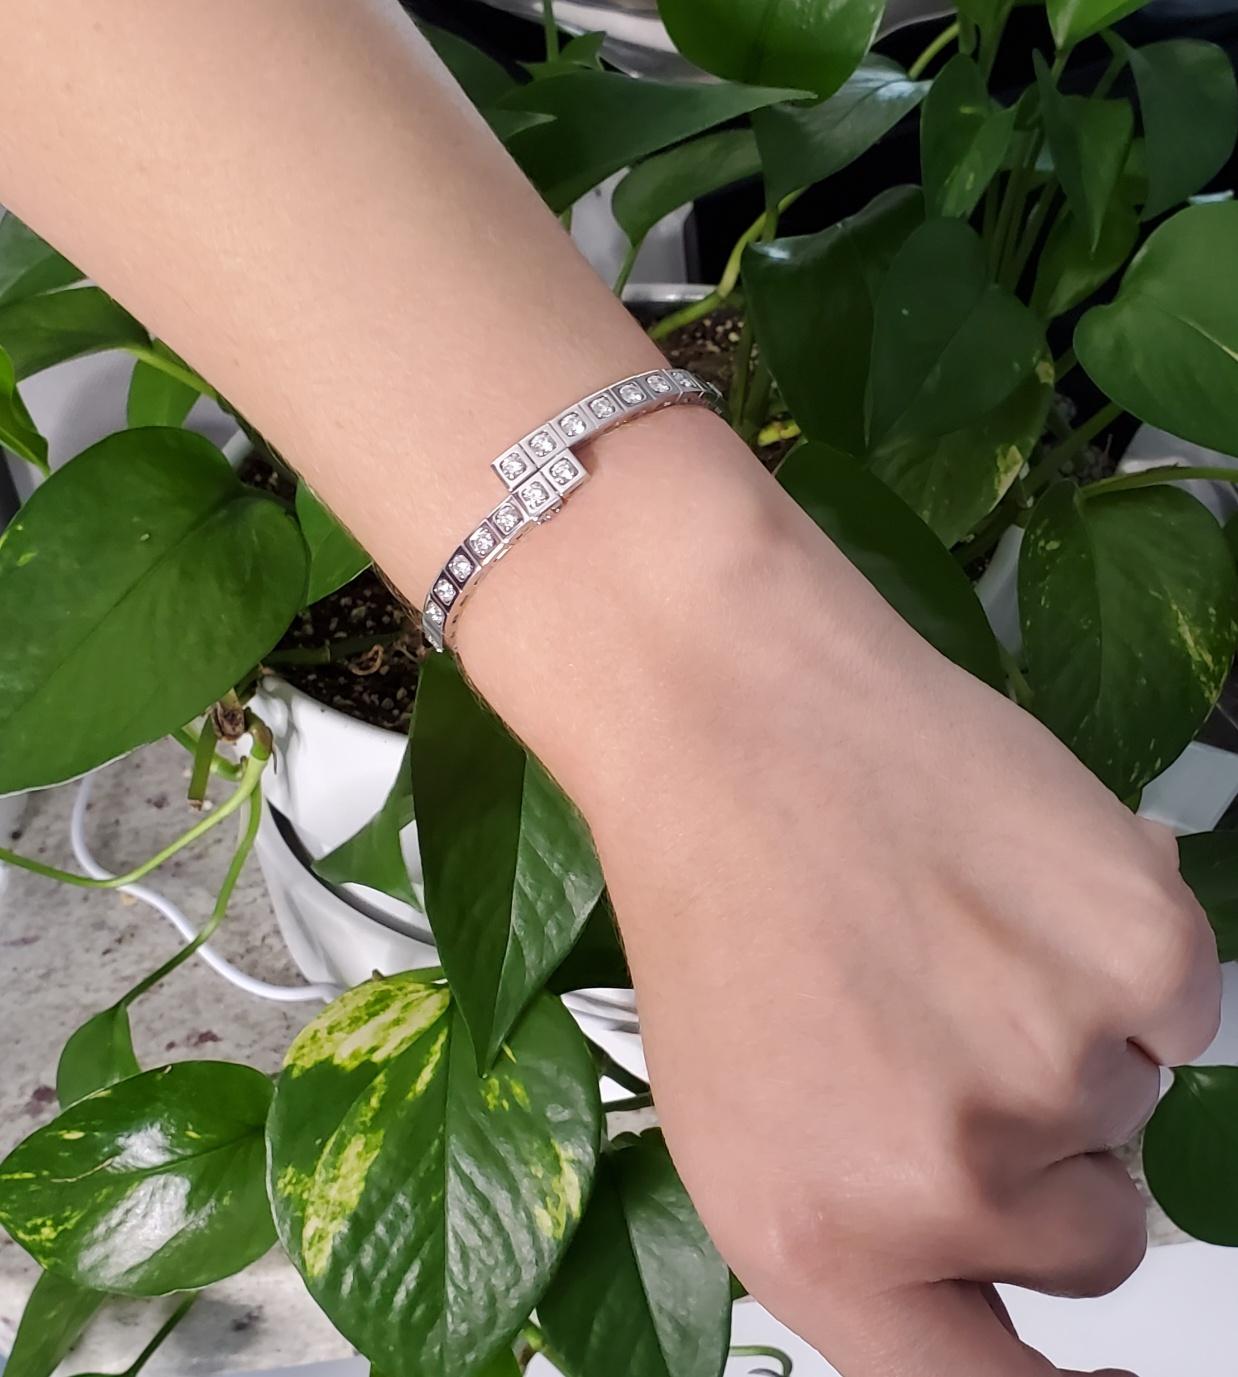 Gem set tectonique bracelet bangle designed by Cartier.

A rare contemporary 18 karats white gold diamond set Tectonique bangle bracelet created by the jewelry house of Cartier. This bracelet is comprised of square links, of which 21 are set with a